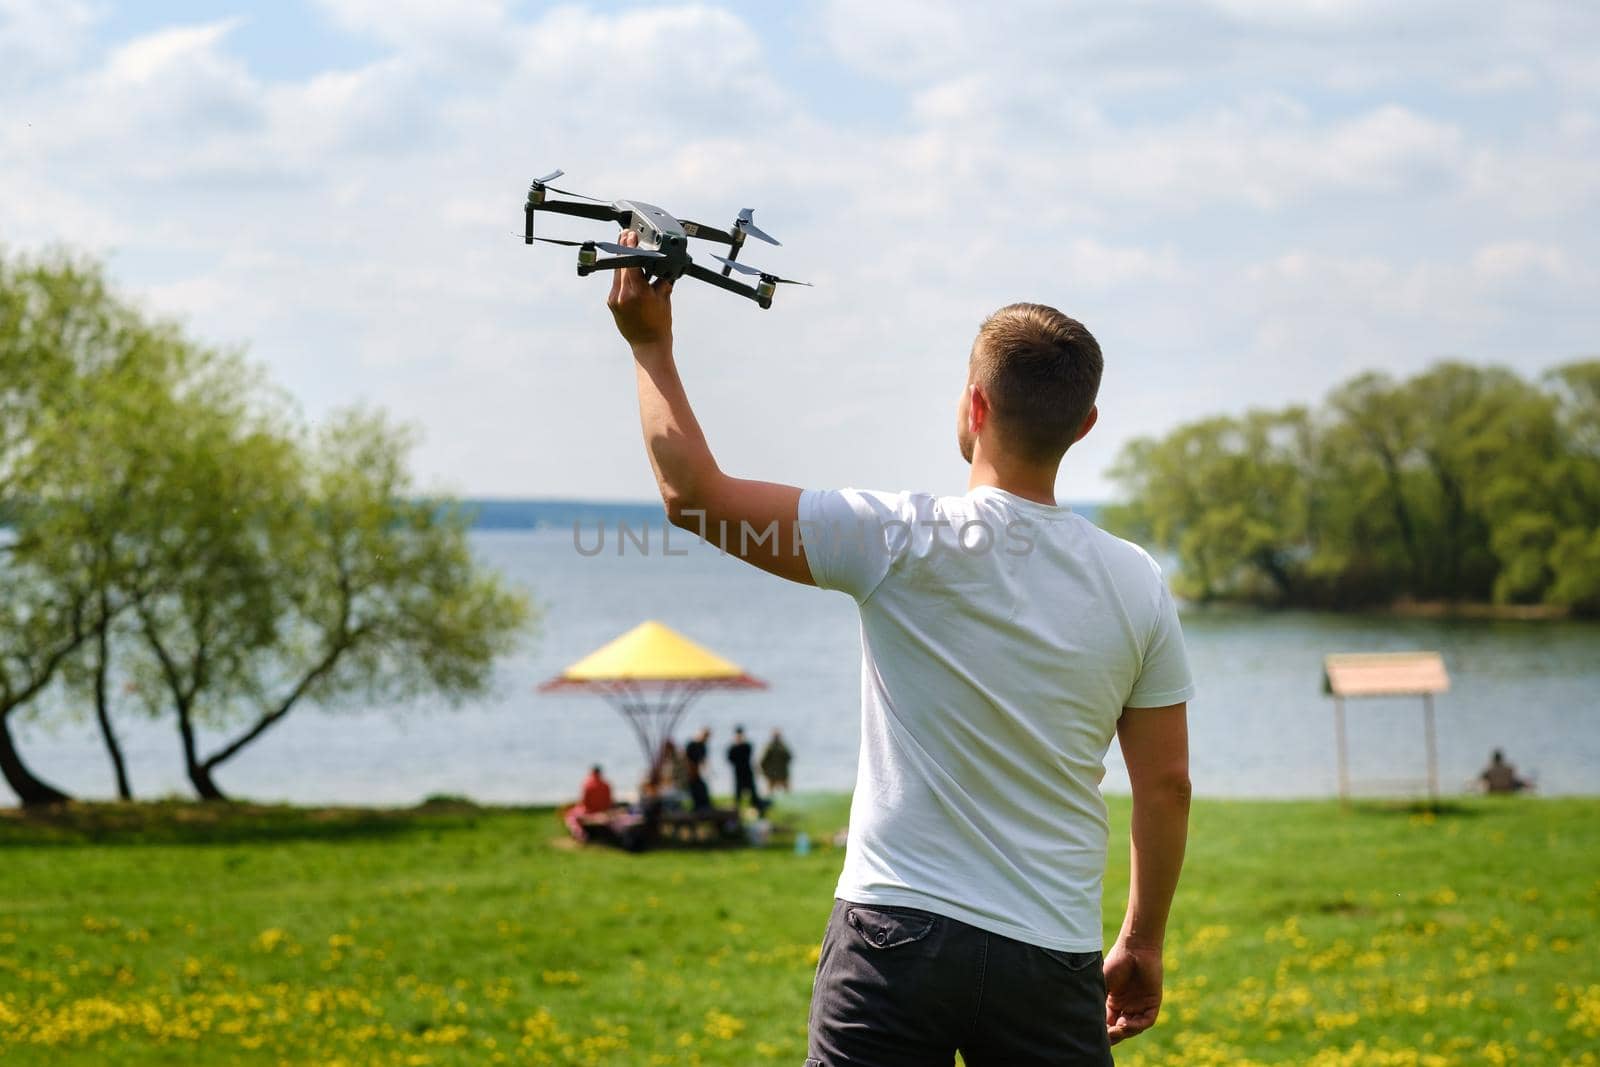 A man with a flying vehicle in his hands, raised to the sky in nature.Launching a drone by Lobachad